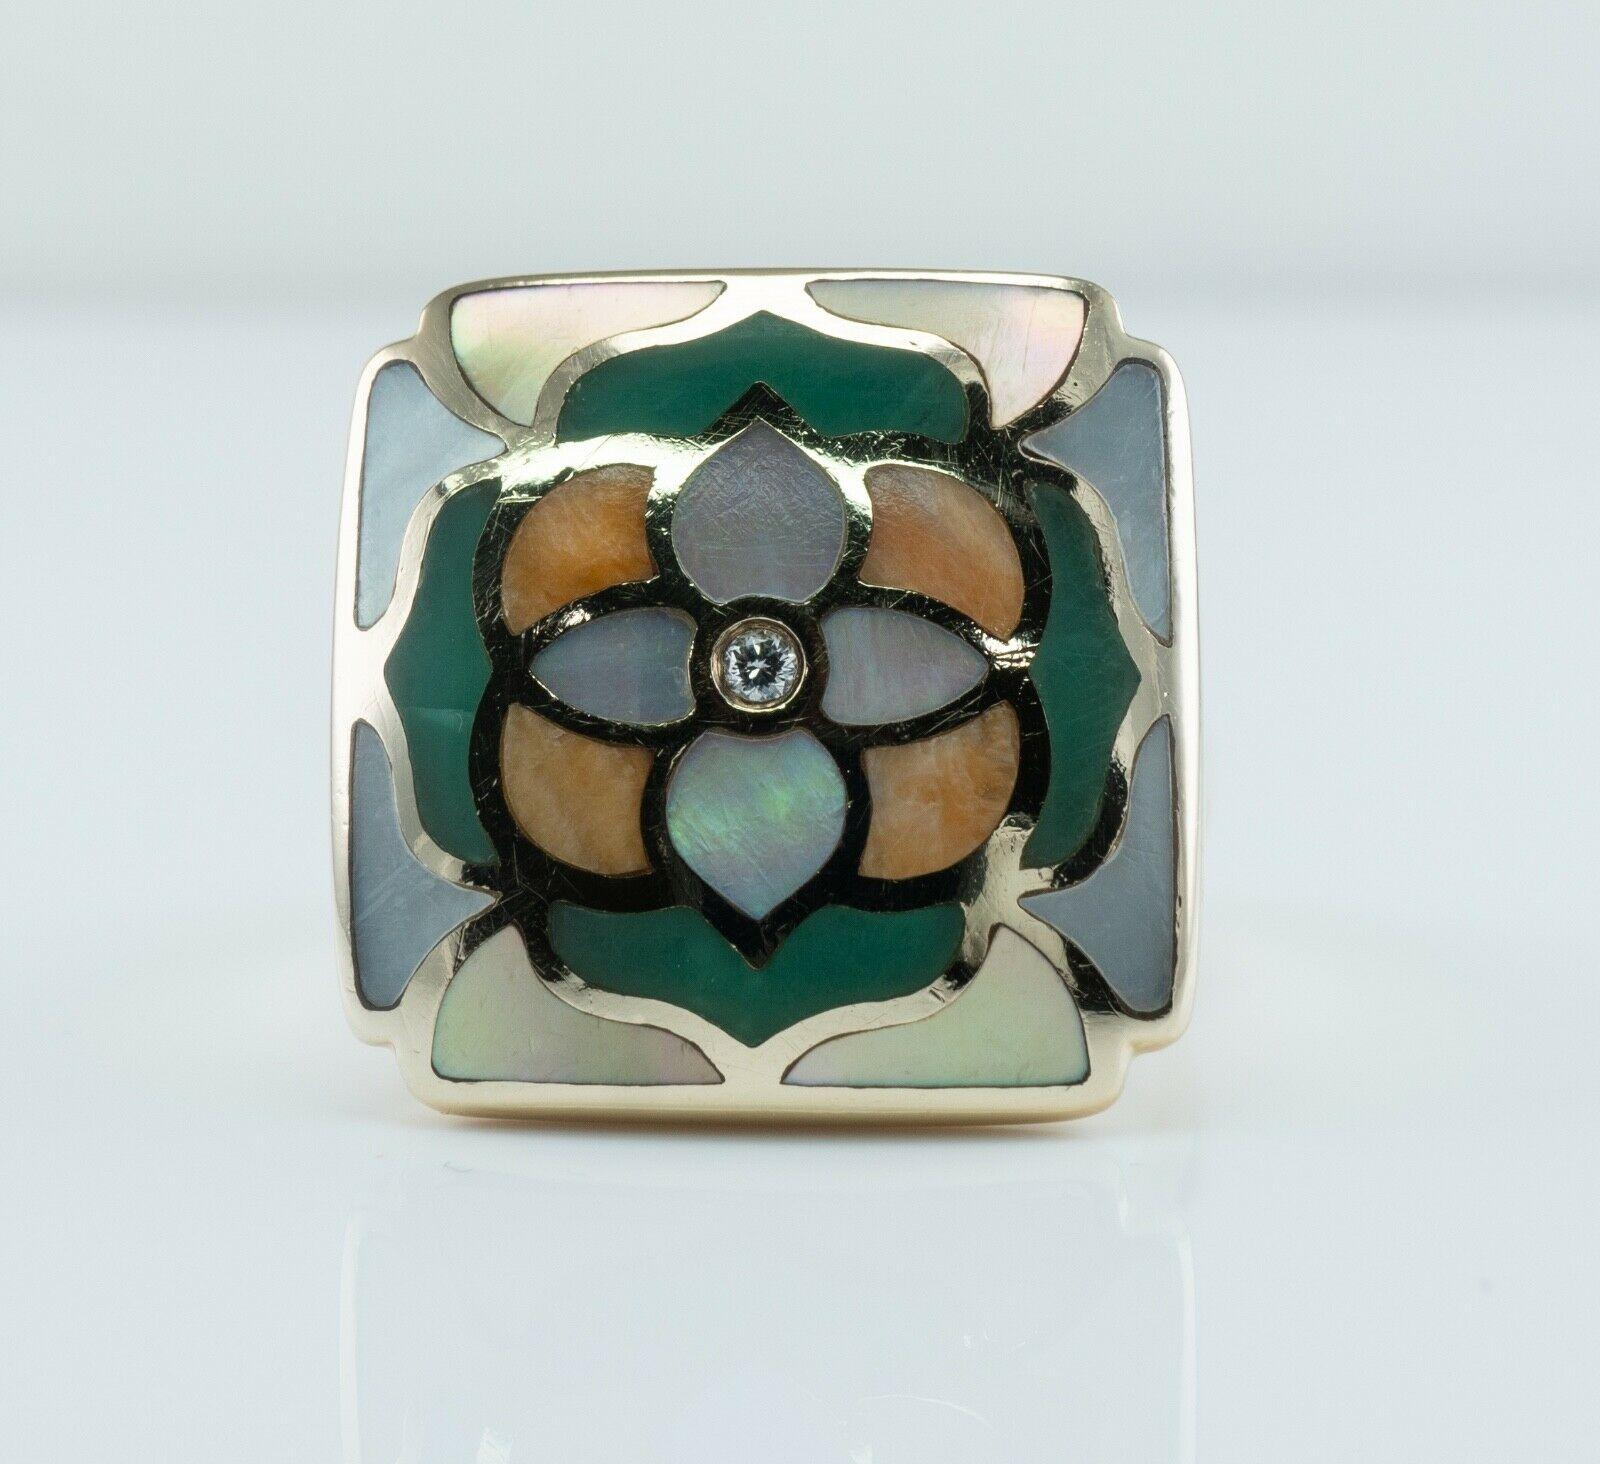 This authentic Asch Grossbardt ring is finely crafted in solid 14K Yellow gold and set with inlaid Mother of pearl and diamond.
The diamond in the center is .03 carat of VS2 clarity and H color.
Inlaid mother of pearl panels are set in the Mandala